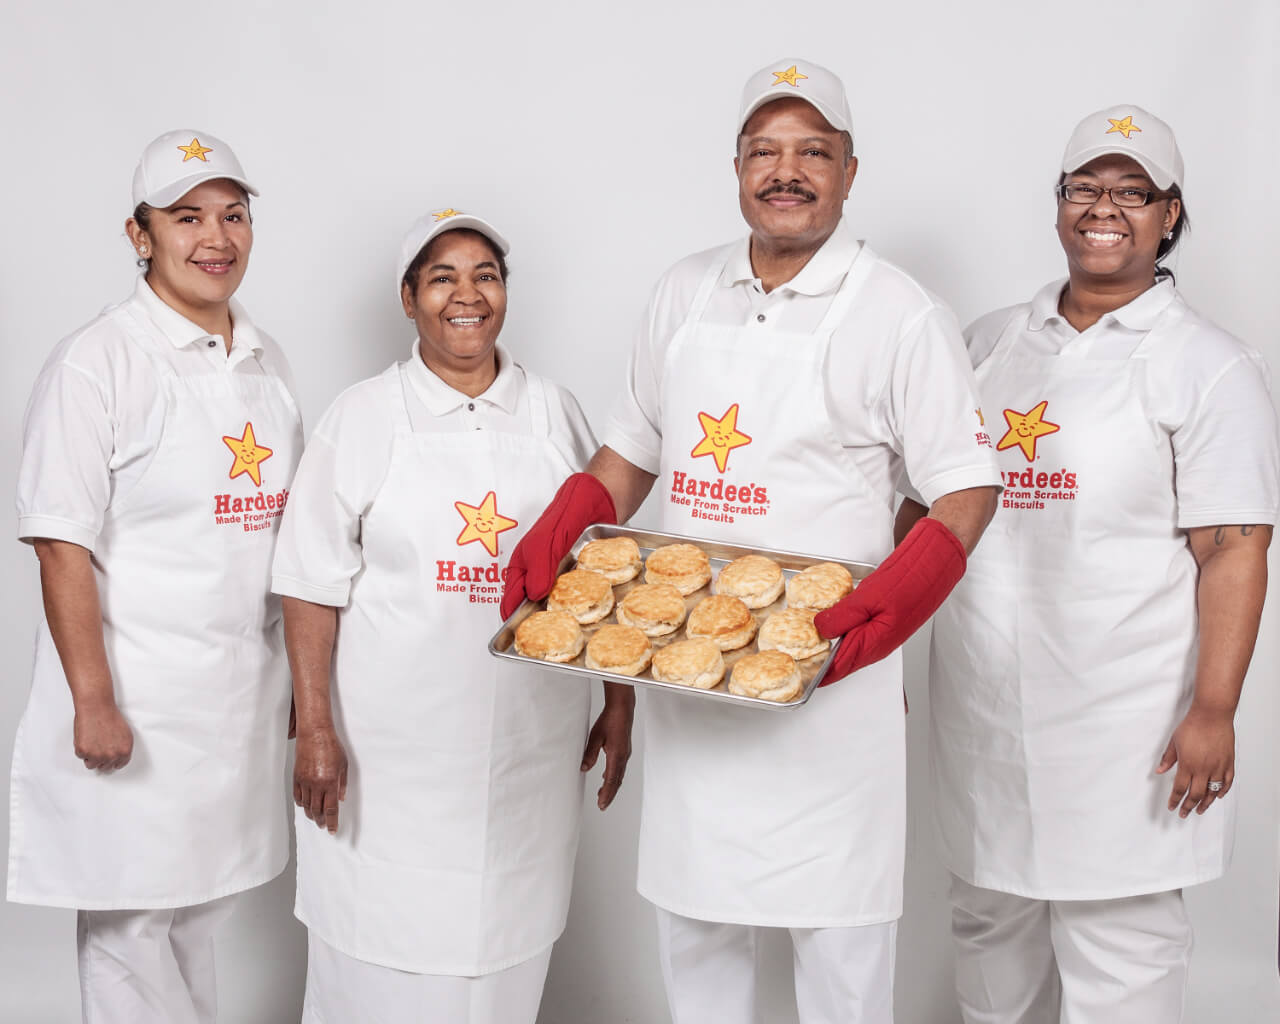 Virginia Beach man wins Hardee's biscuit maker of the year